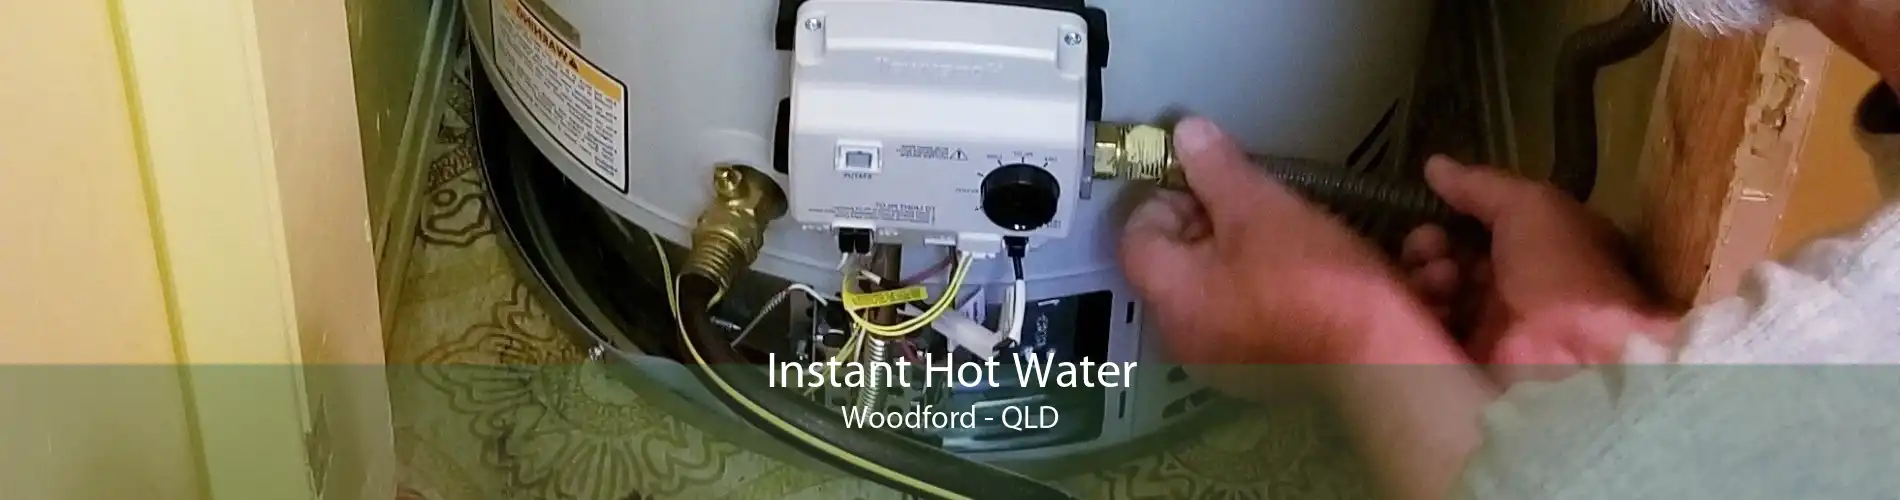 Instant Hot Water Woodford - QLD